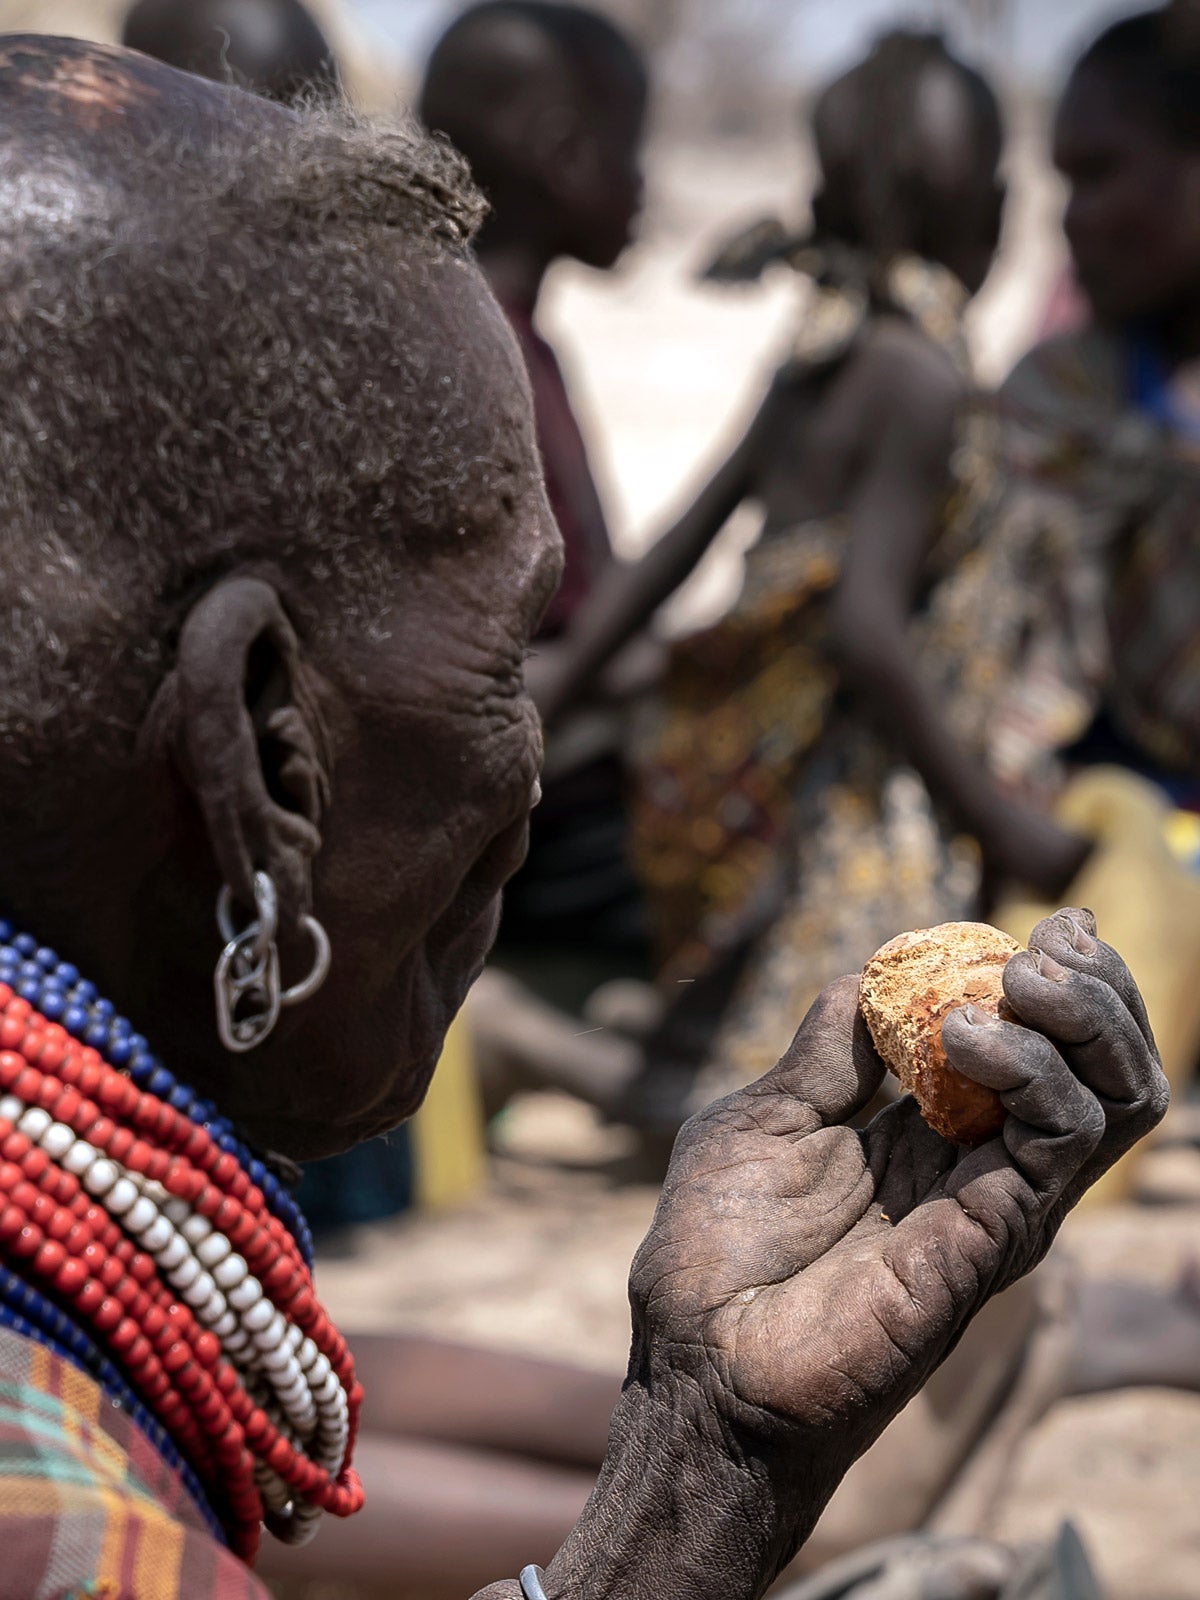 A woman of the East African Turkana tribe eats the seed of a palm tree. She is mostly bald, wears traditional tribal clothing and a beaded necklace and a silver earring made of a can tab. The palm seed is brown-red, is round, shriveled and about the size of a clementine.